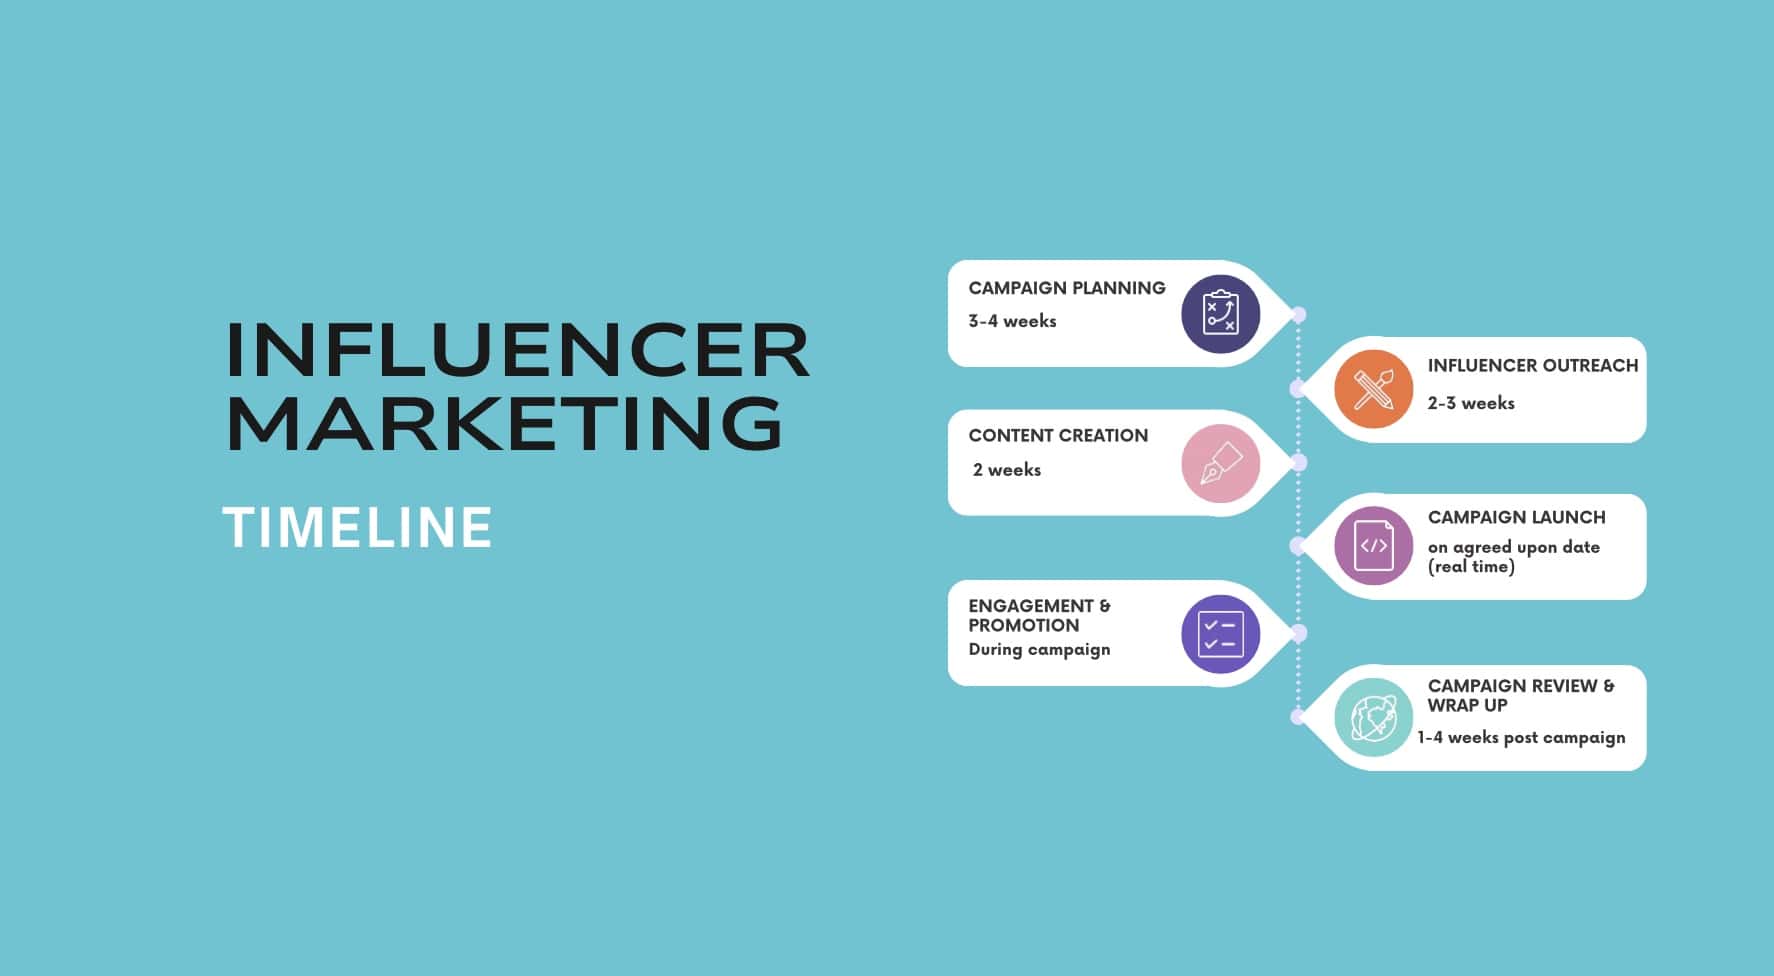 Why an Influencer Marketing Campaign Timeline is essential for effective  Campaign Management